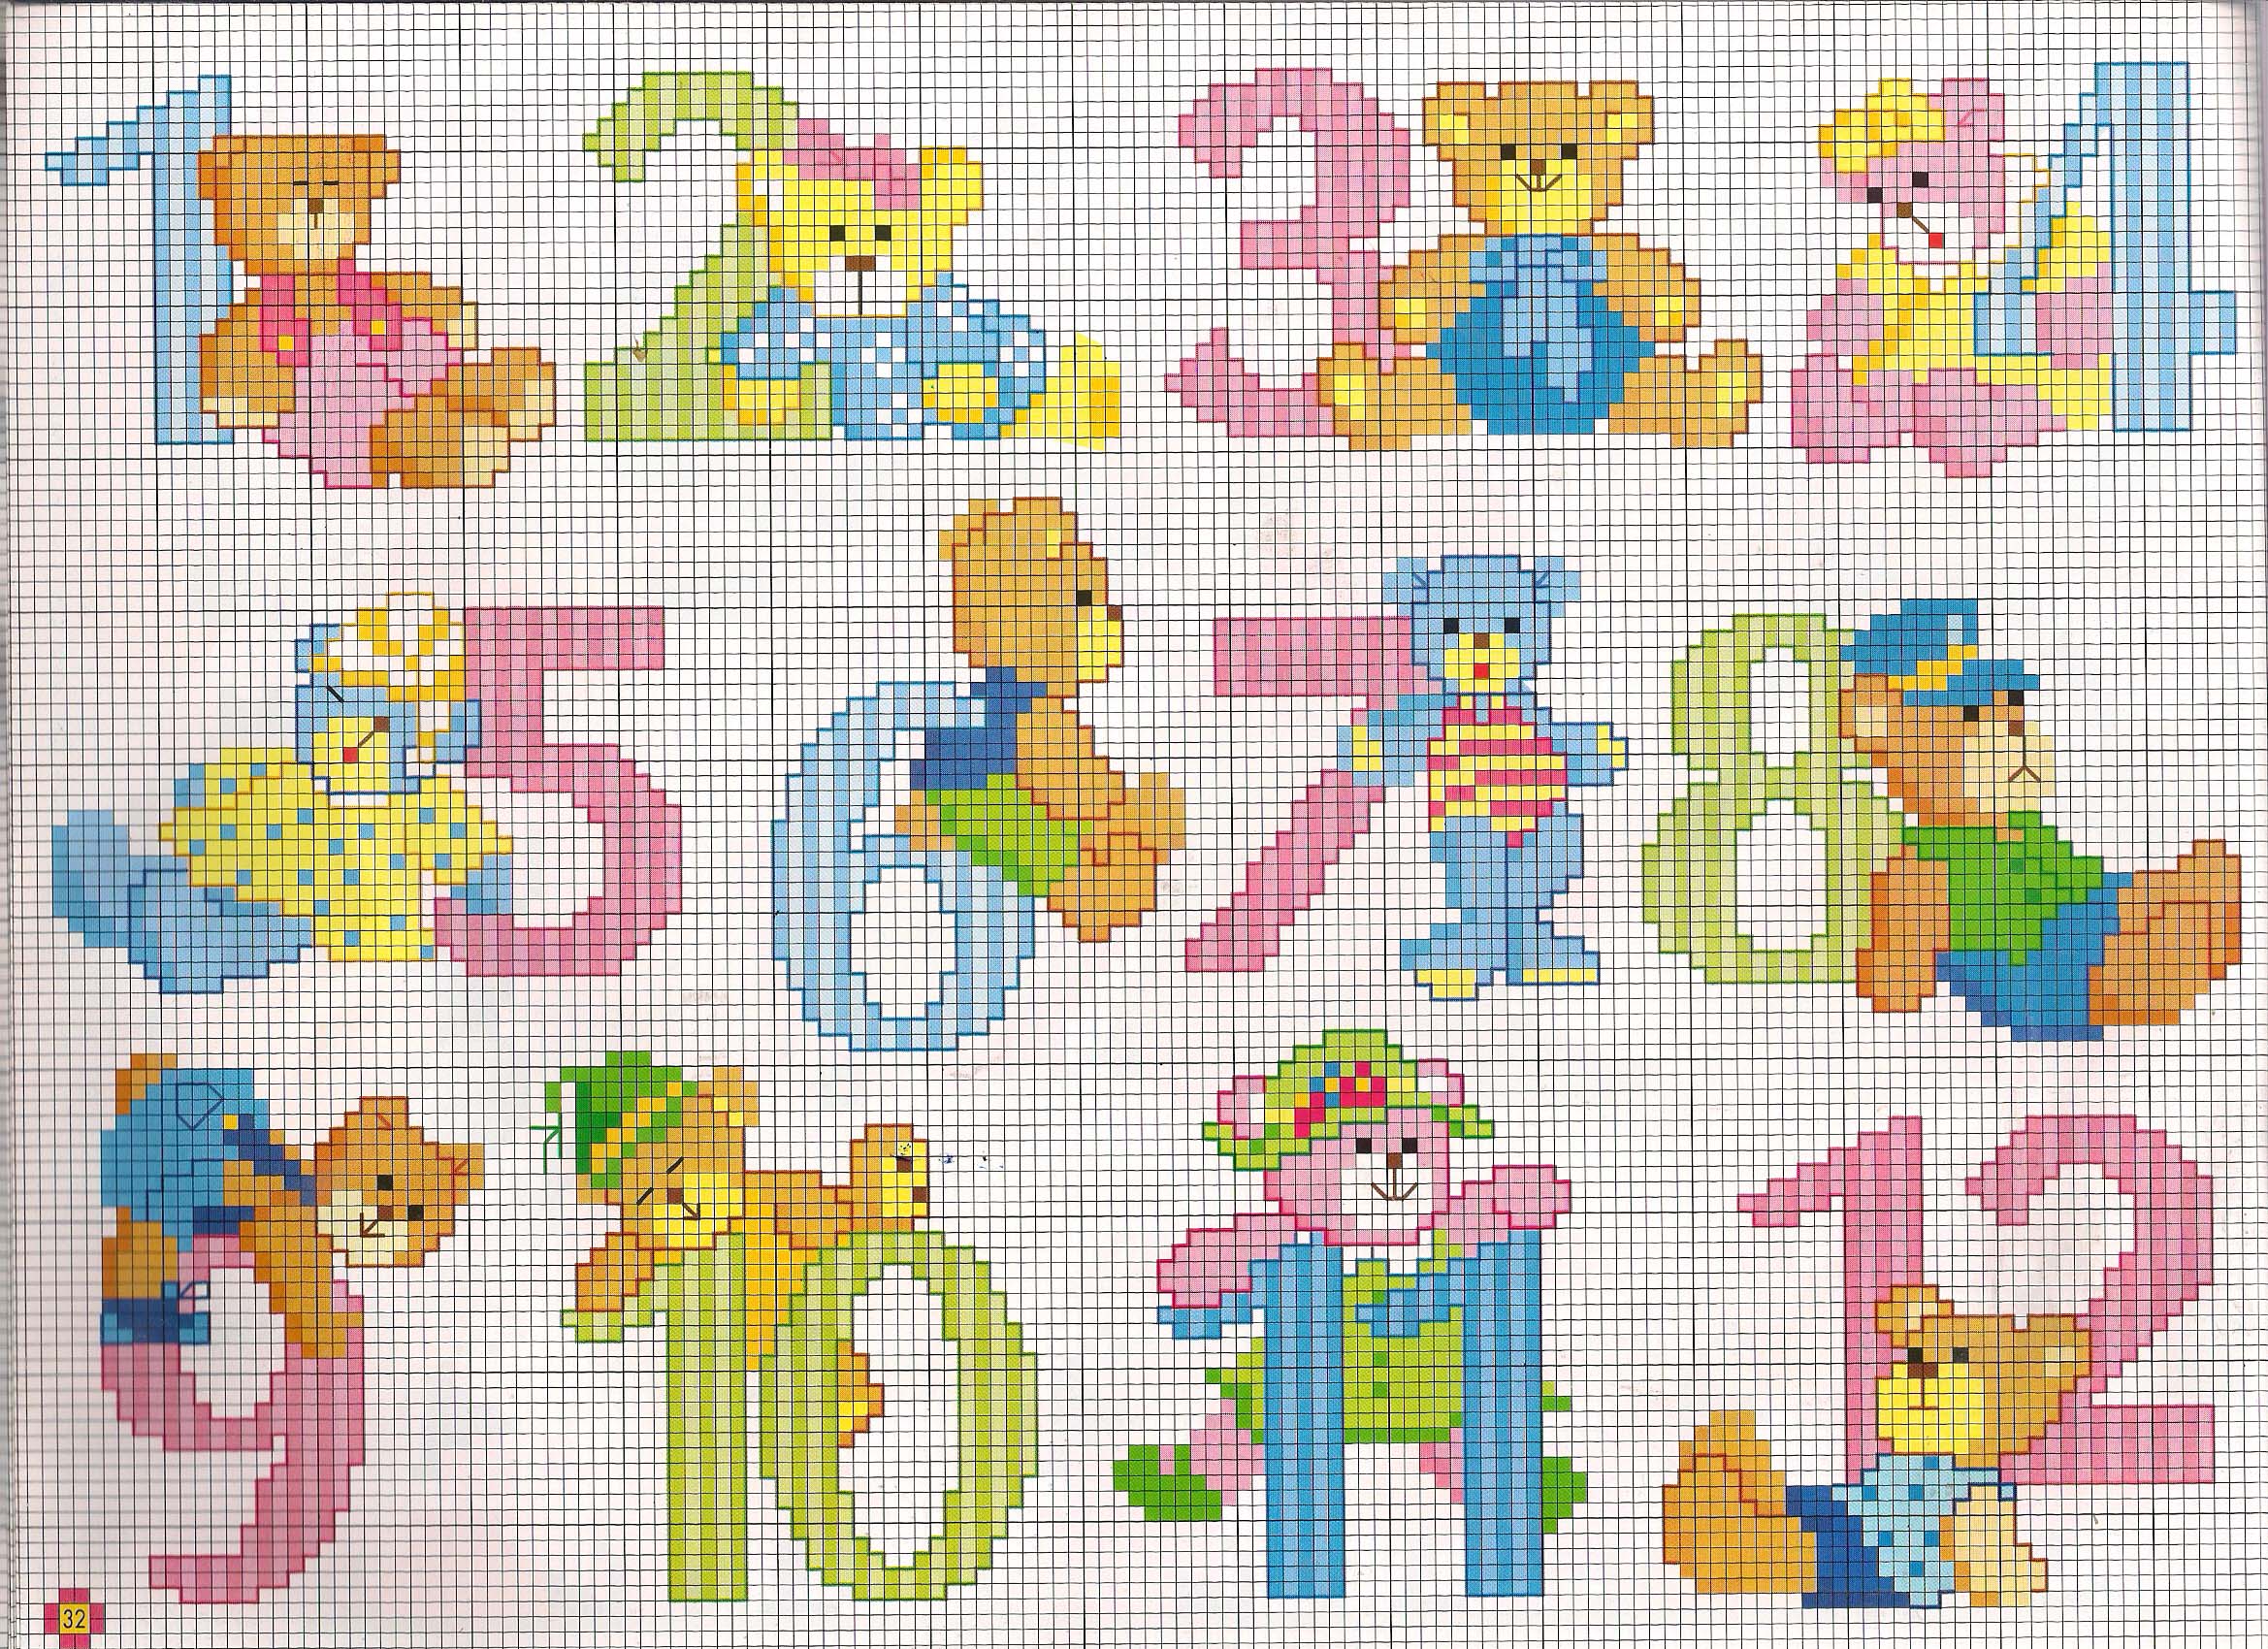 Cross stitch numbers from zero to twelve with teddy bears